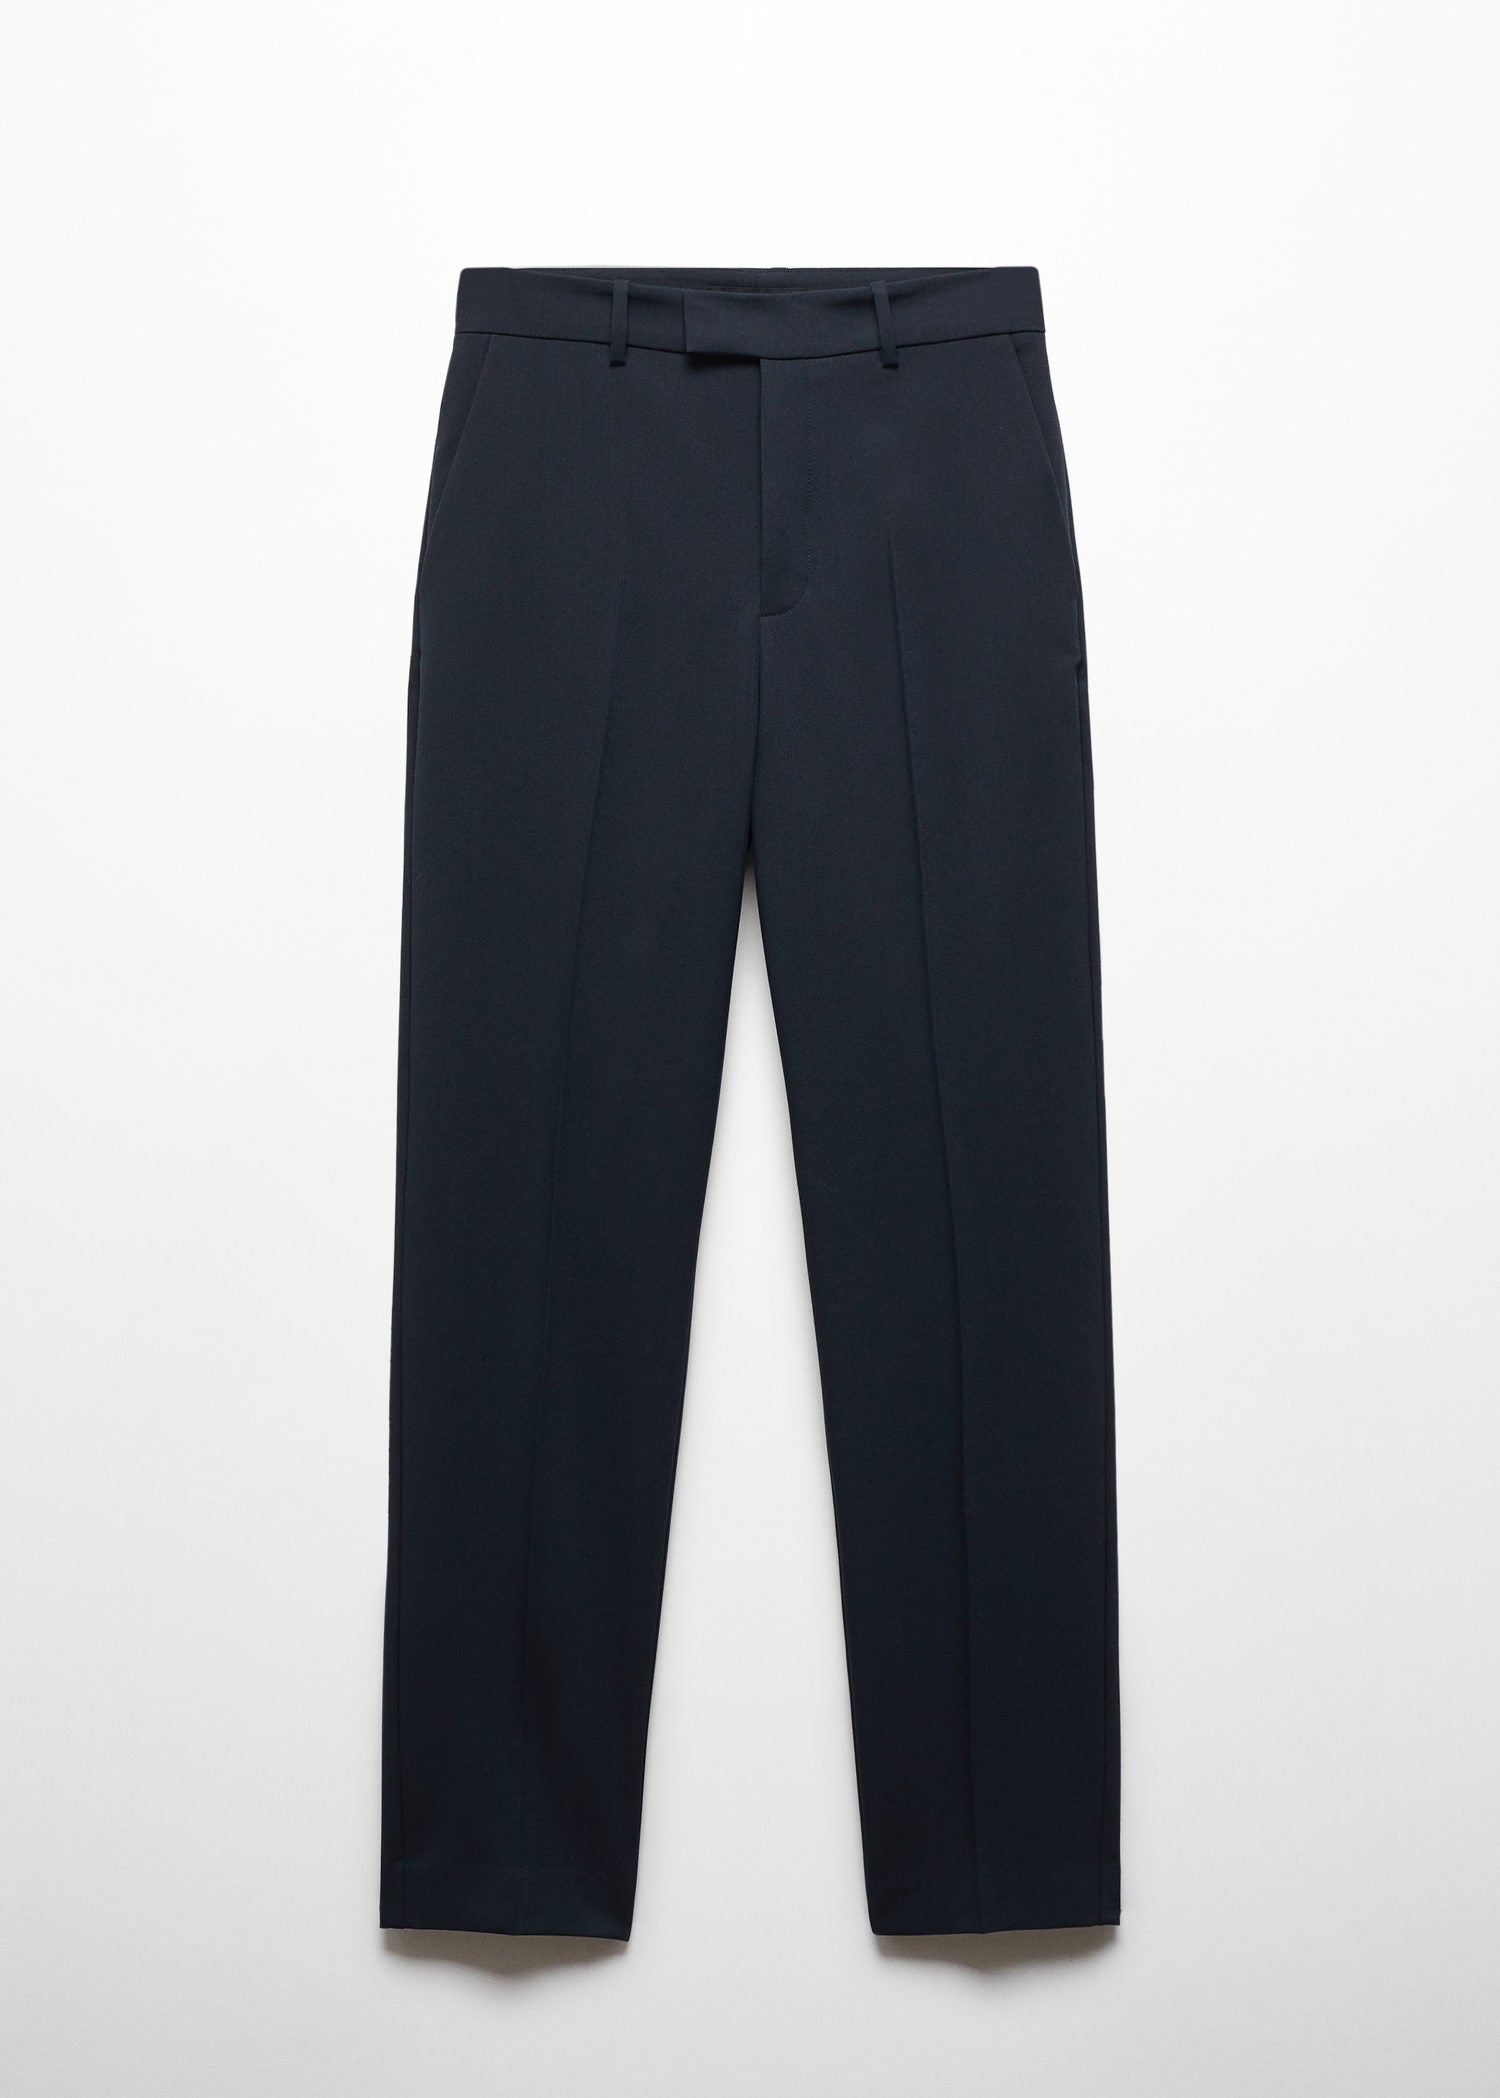 Mango Straight suit trousers 4 Shaws Department Stores